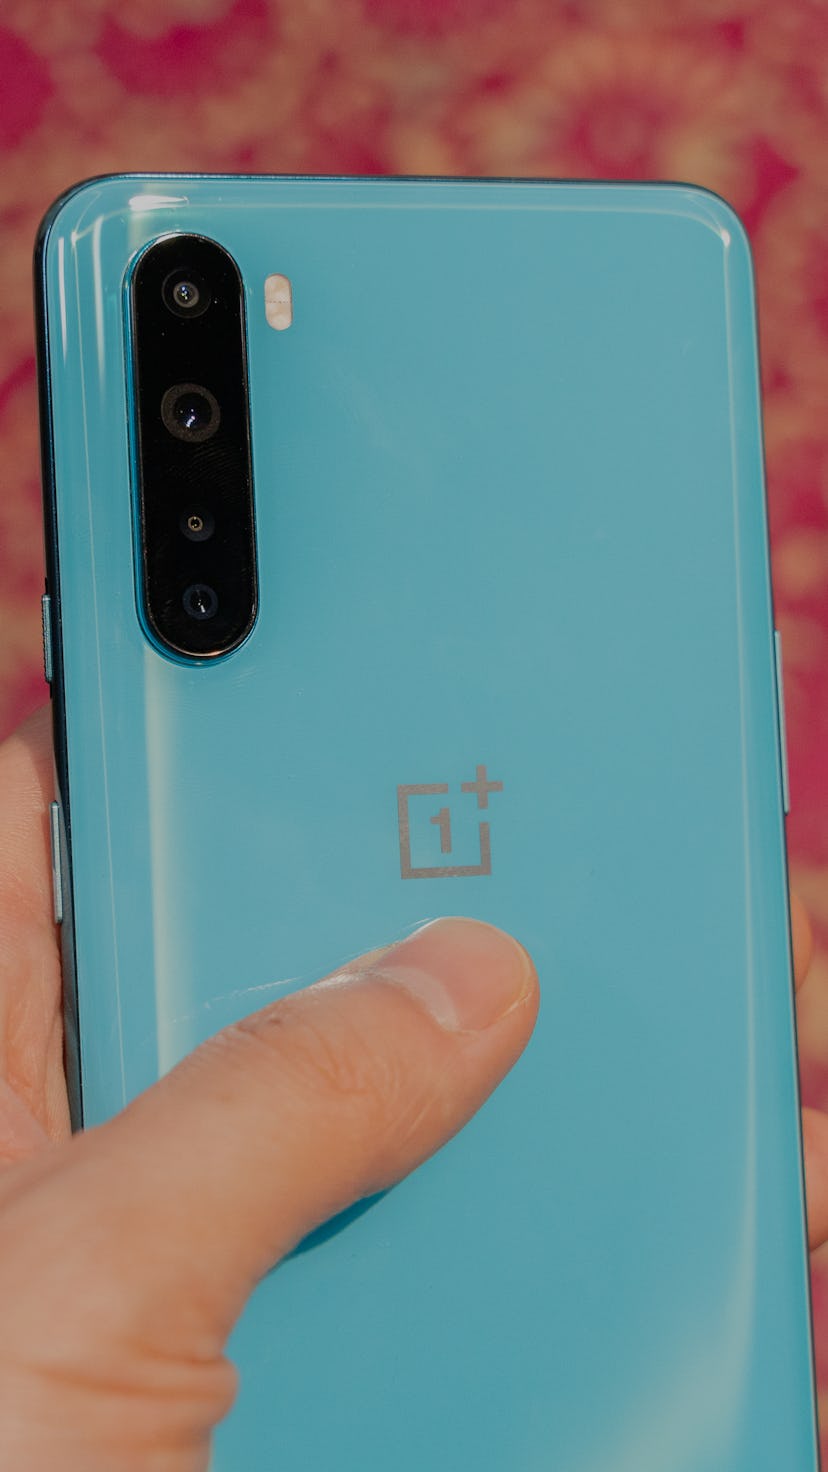 The OnePlus Nord smartphone in blue.